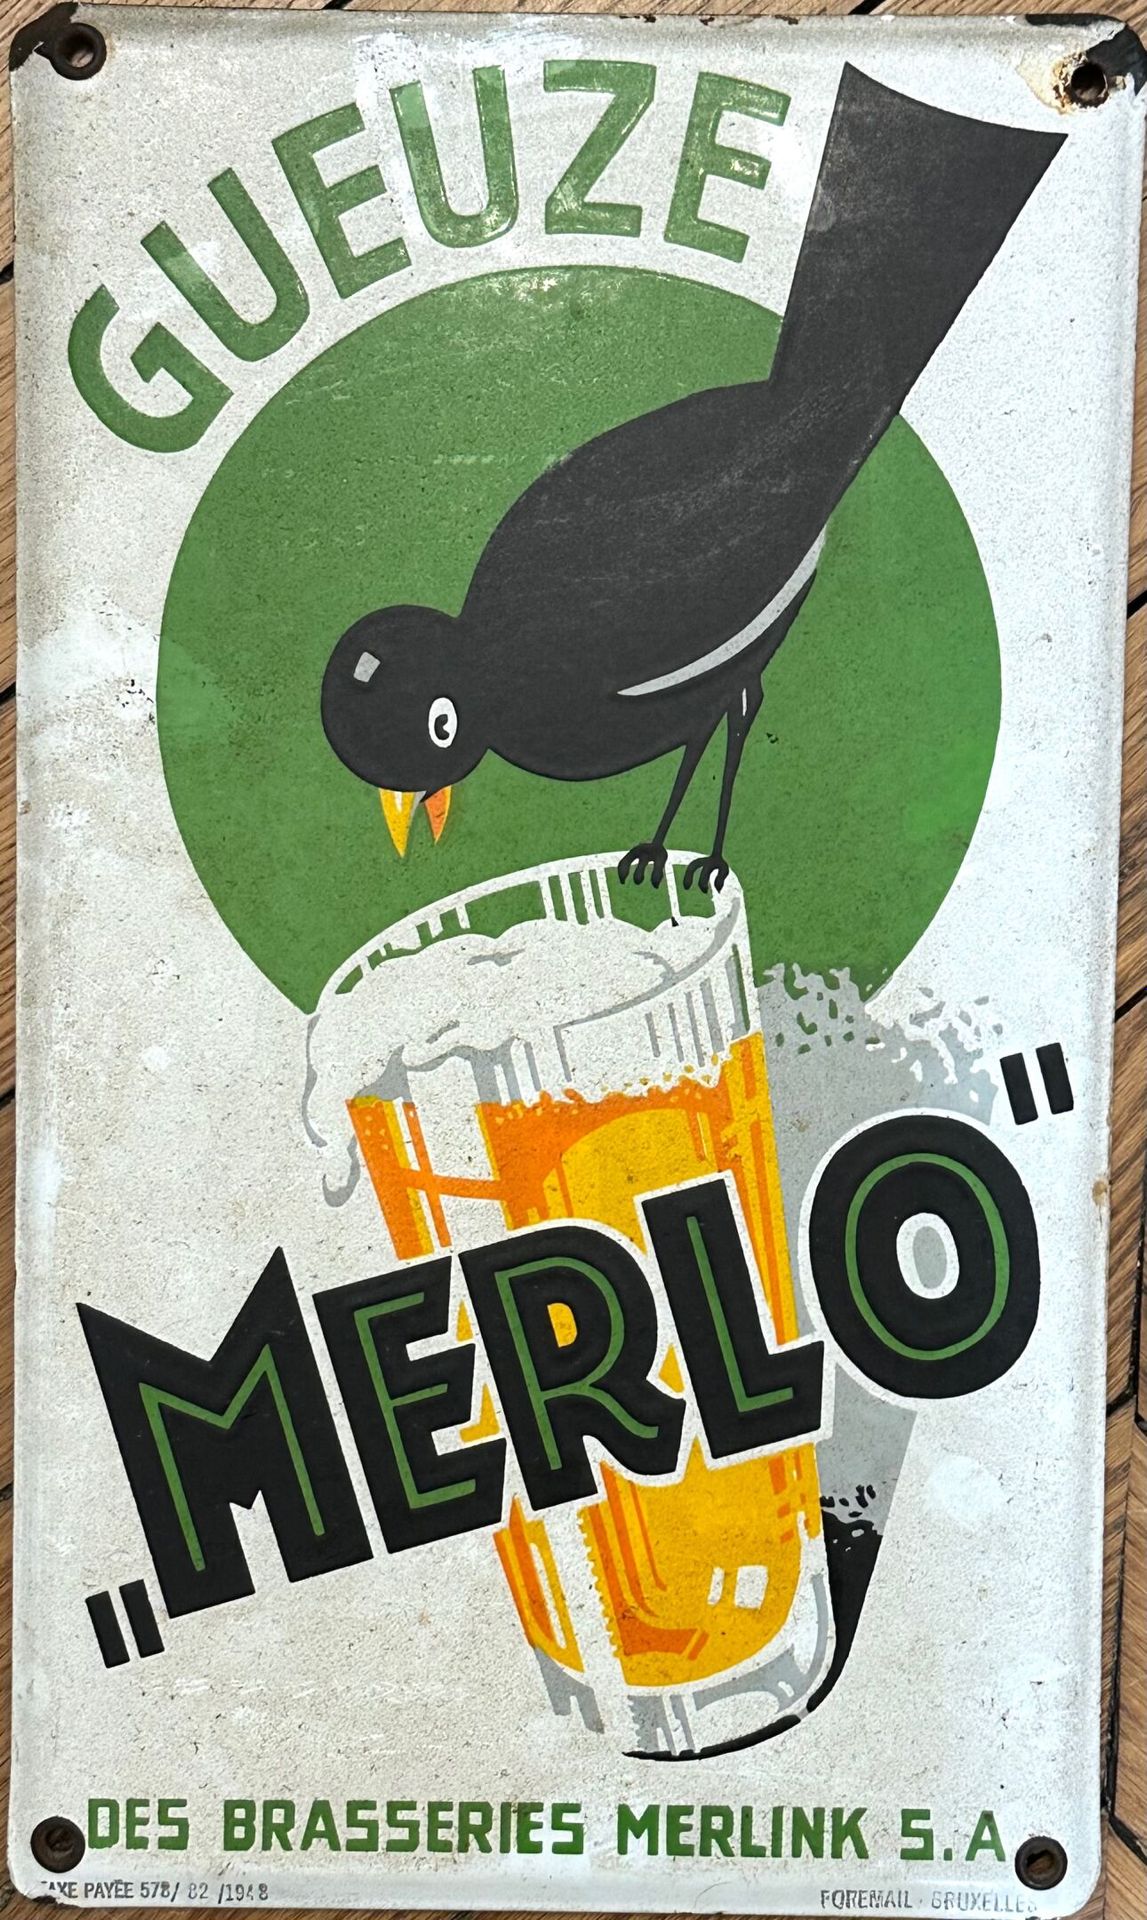 Null GUEUZE "MERLO
Enameled advertising plate for Brasseries Merlink S.A. 
Size:&hellip;